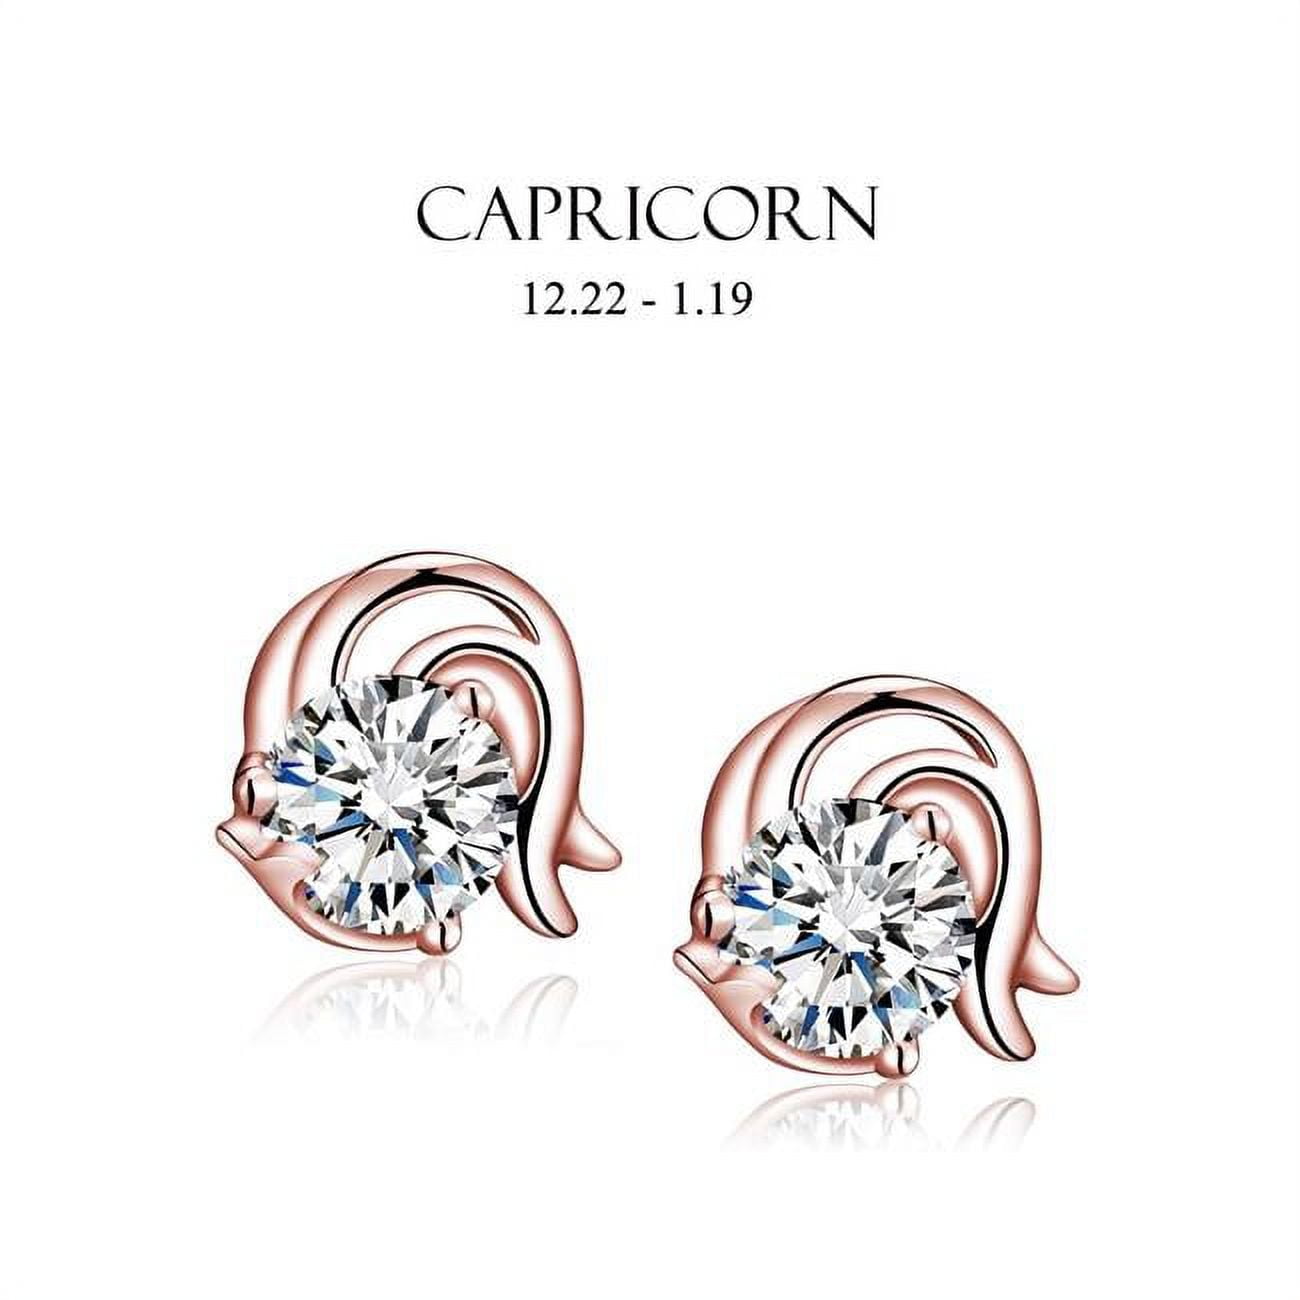 Picture of Amabel Designs E-I2CZCPR-RG Rose Gold Cubic Zirconia Capricorn Stud Earrings